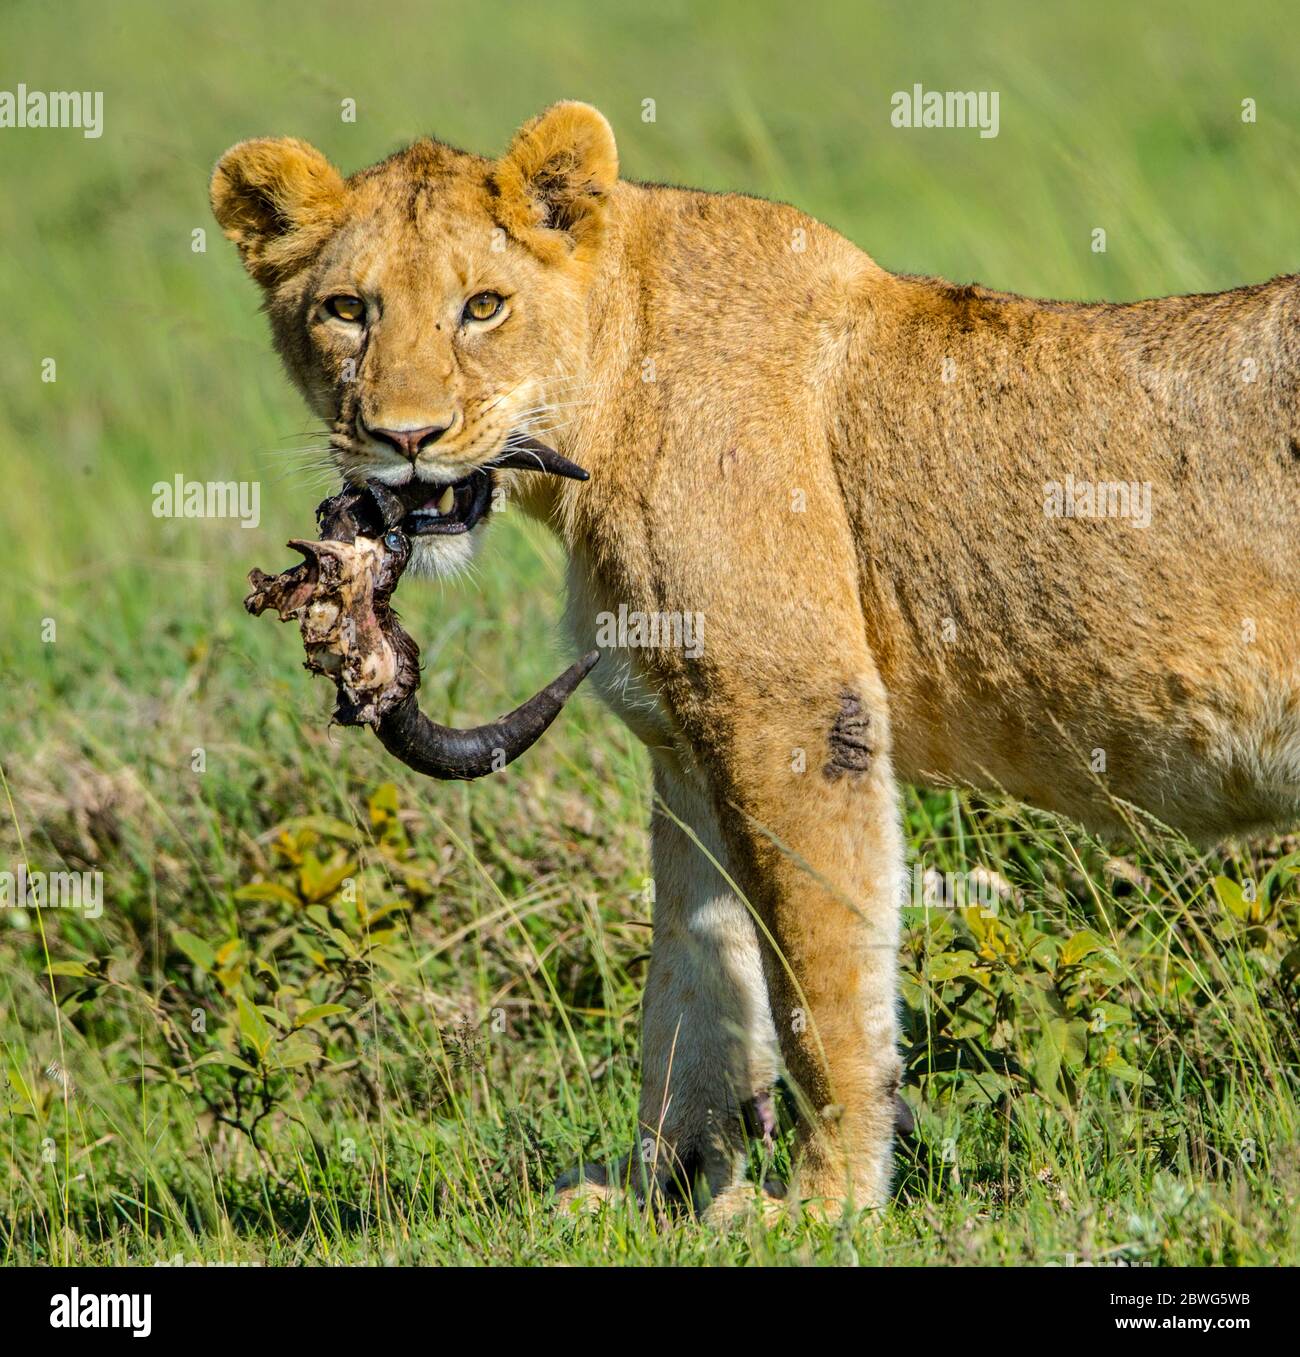 Lioness (Panthera leo) looking at camera with dead animal horns in mouth, Ngorongoro Conservation Area, Tanzania, Africa Stock Photo